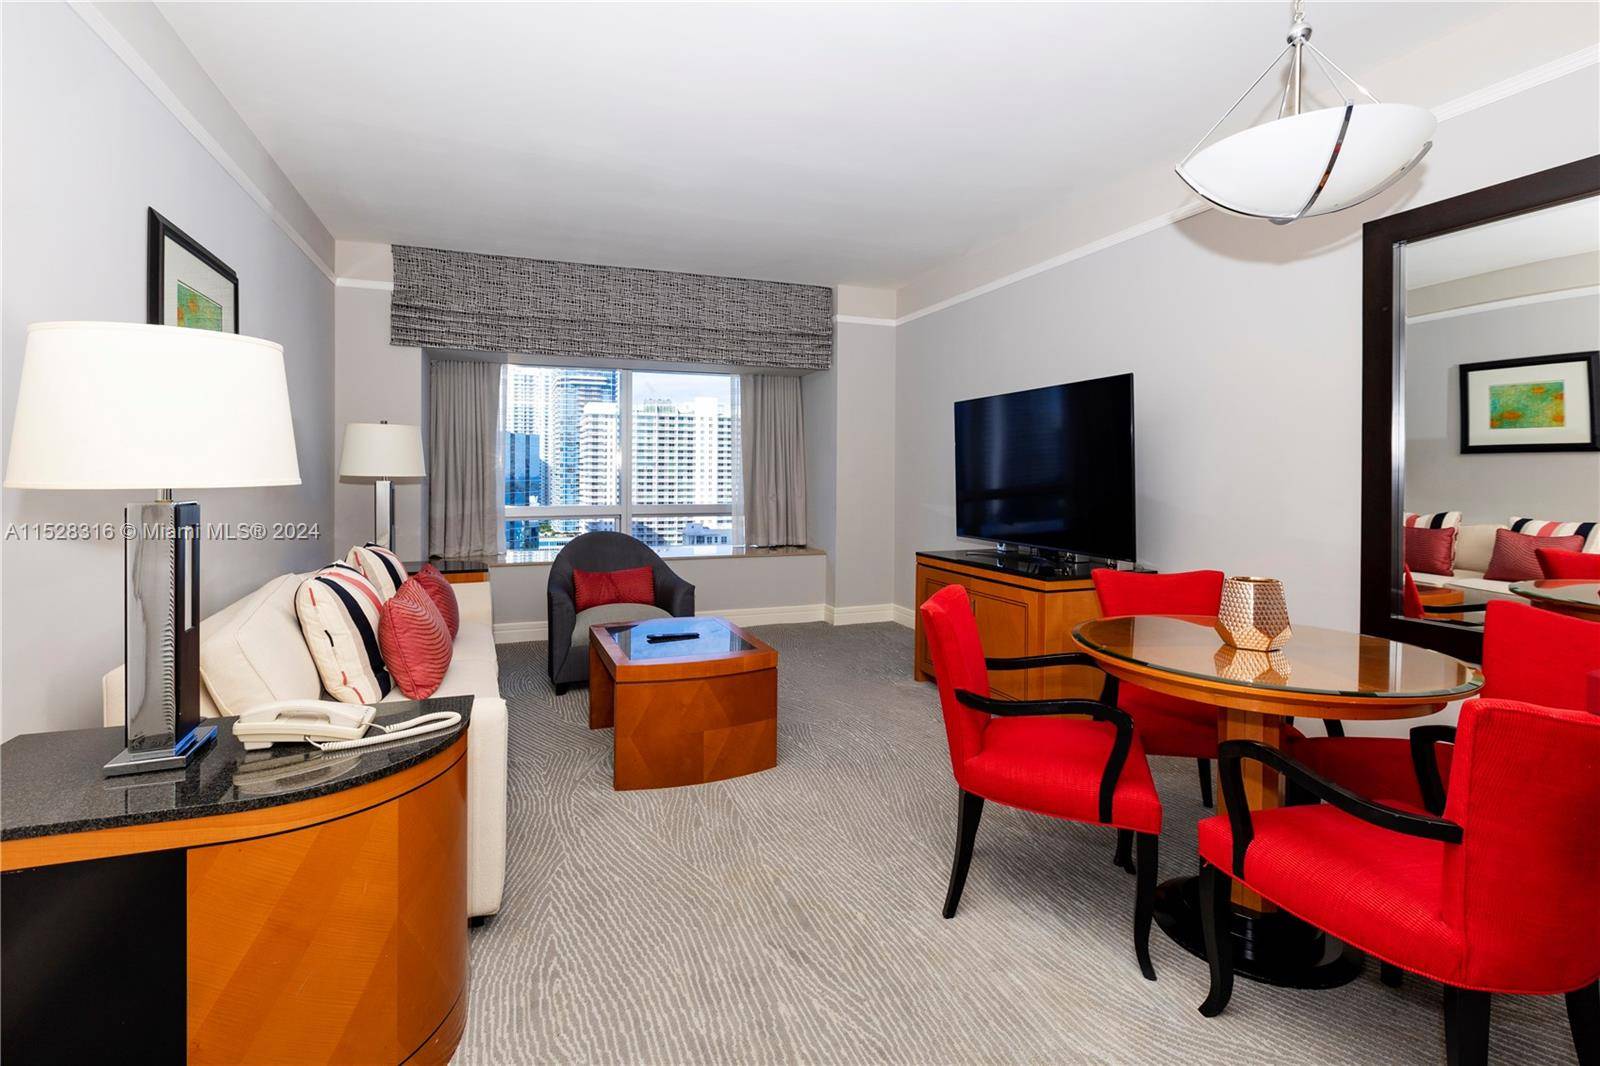 Remodeled 1 bedroom Executive suite with city views.